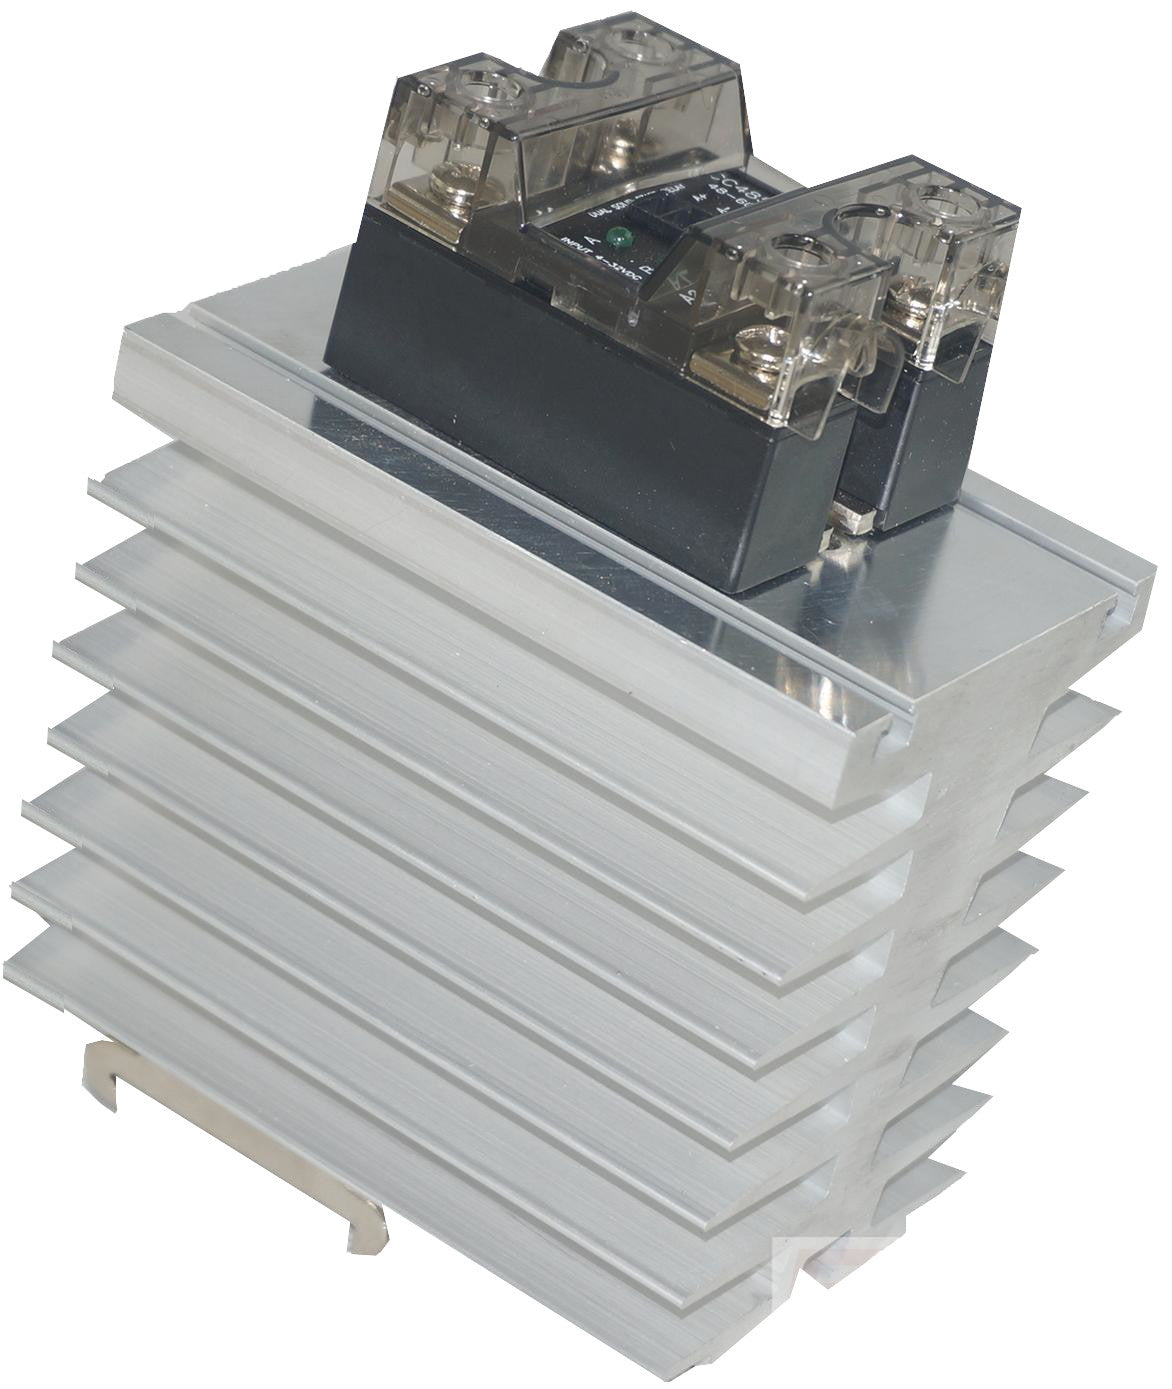 GFIN/150M-DR + CC4850W3VH, Din Rail Mount Dual Solid State Relay with Heatsink, 4-32VDC Control Input, LED Status Indicator, 1200V Transient withstand, 48-600VAC Output, 2 x 39 Amps @ 40 Deg C ambient